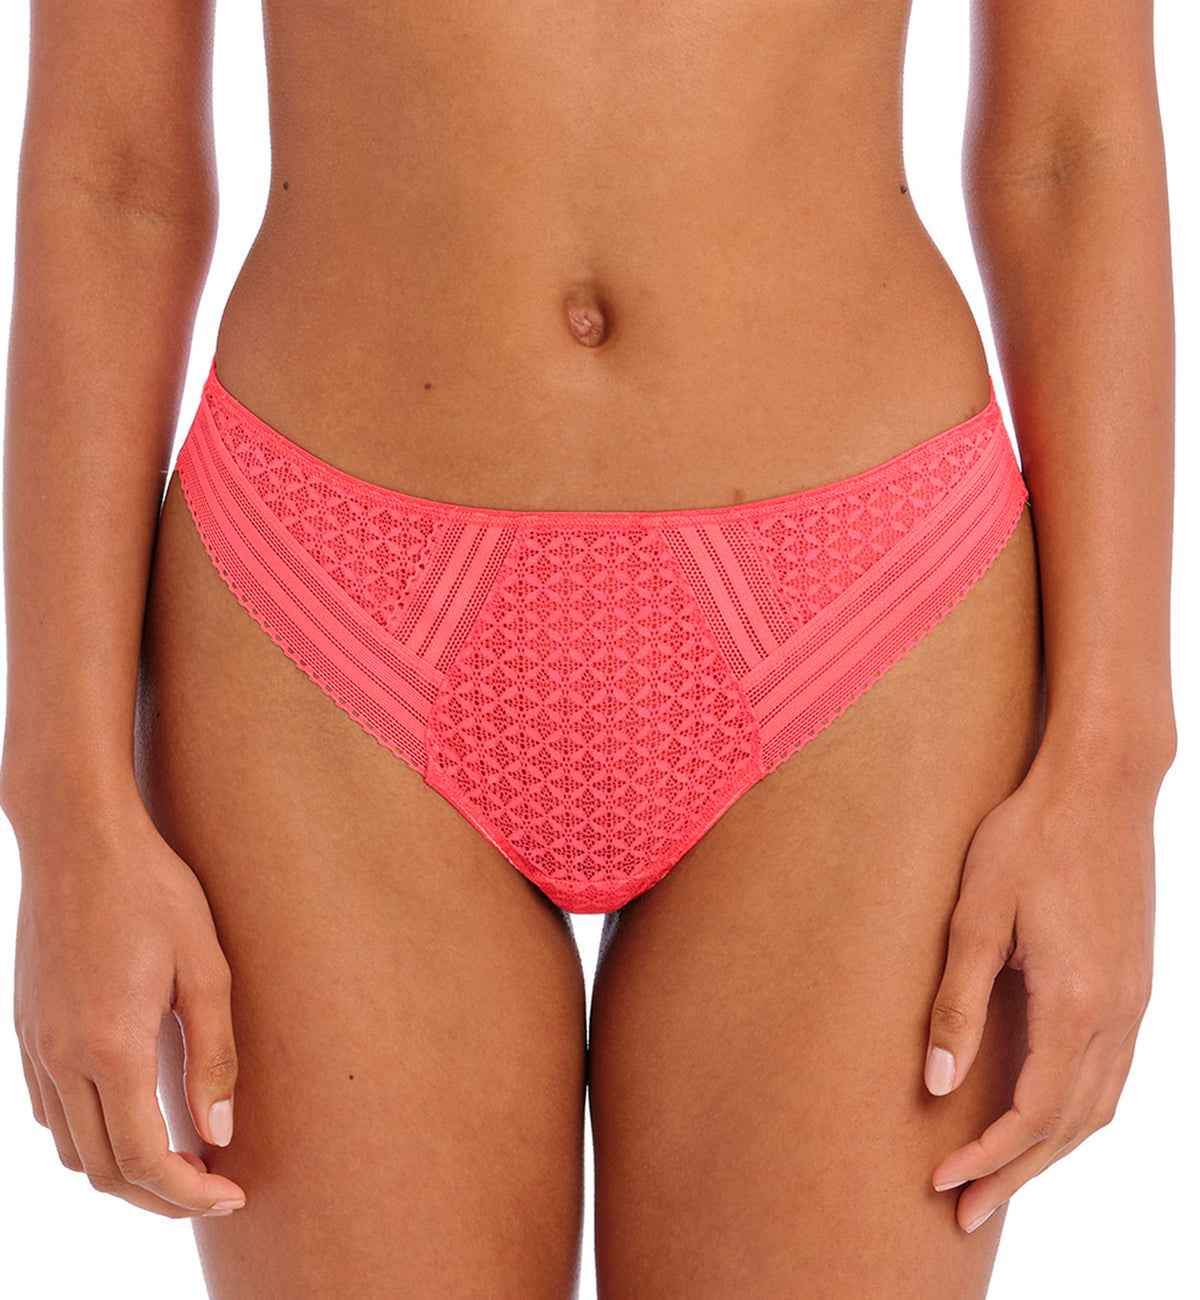 Freya Viva Matching Brazilian Panty (5647),XS,Sunkissed Coral - Sunkissed Coral,XS